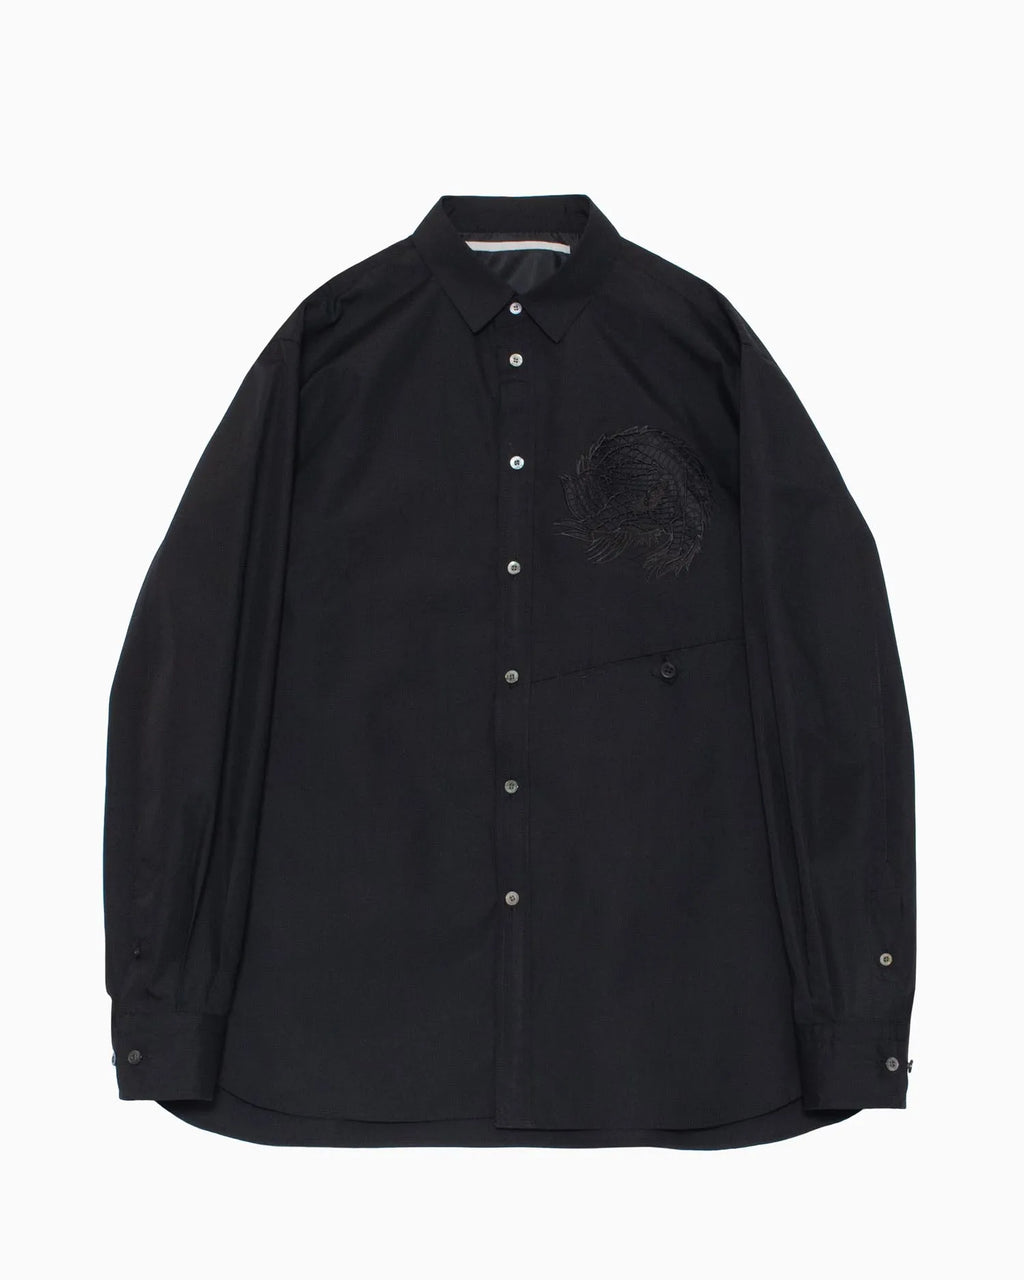 EMBROIDERY SHIRT BLACK